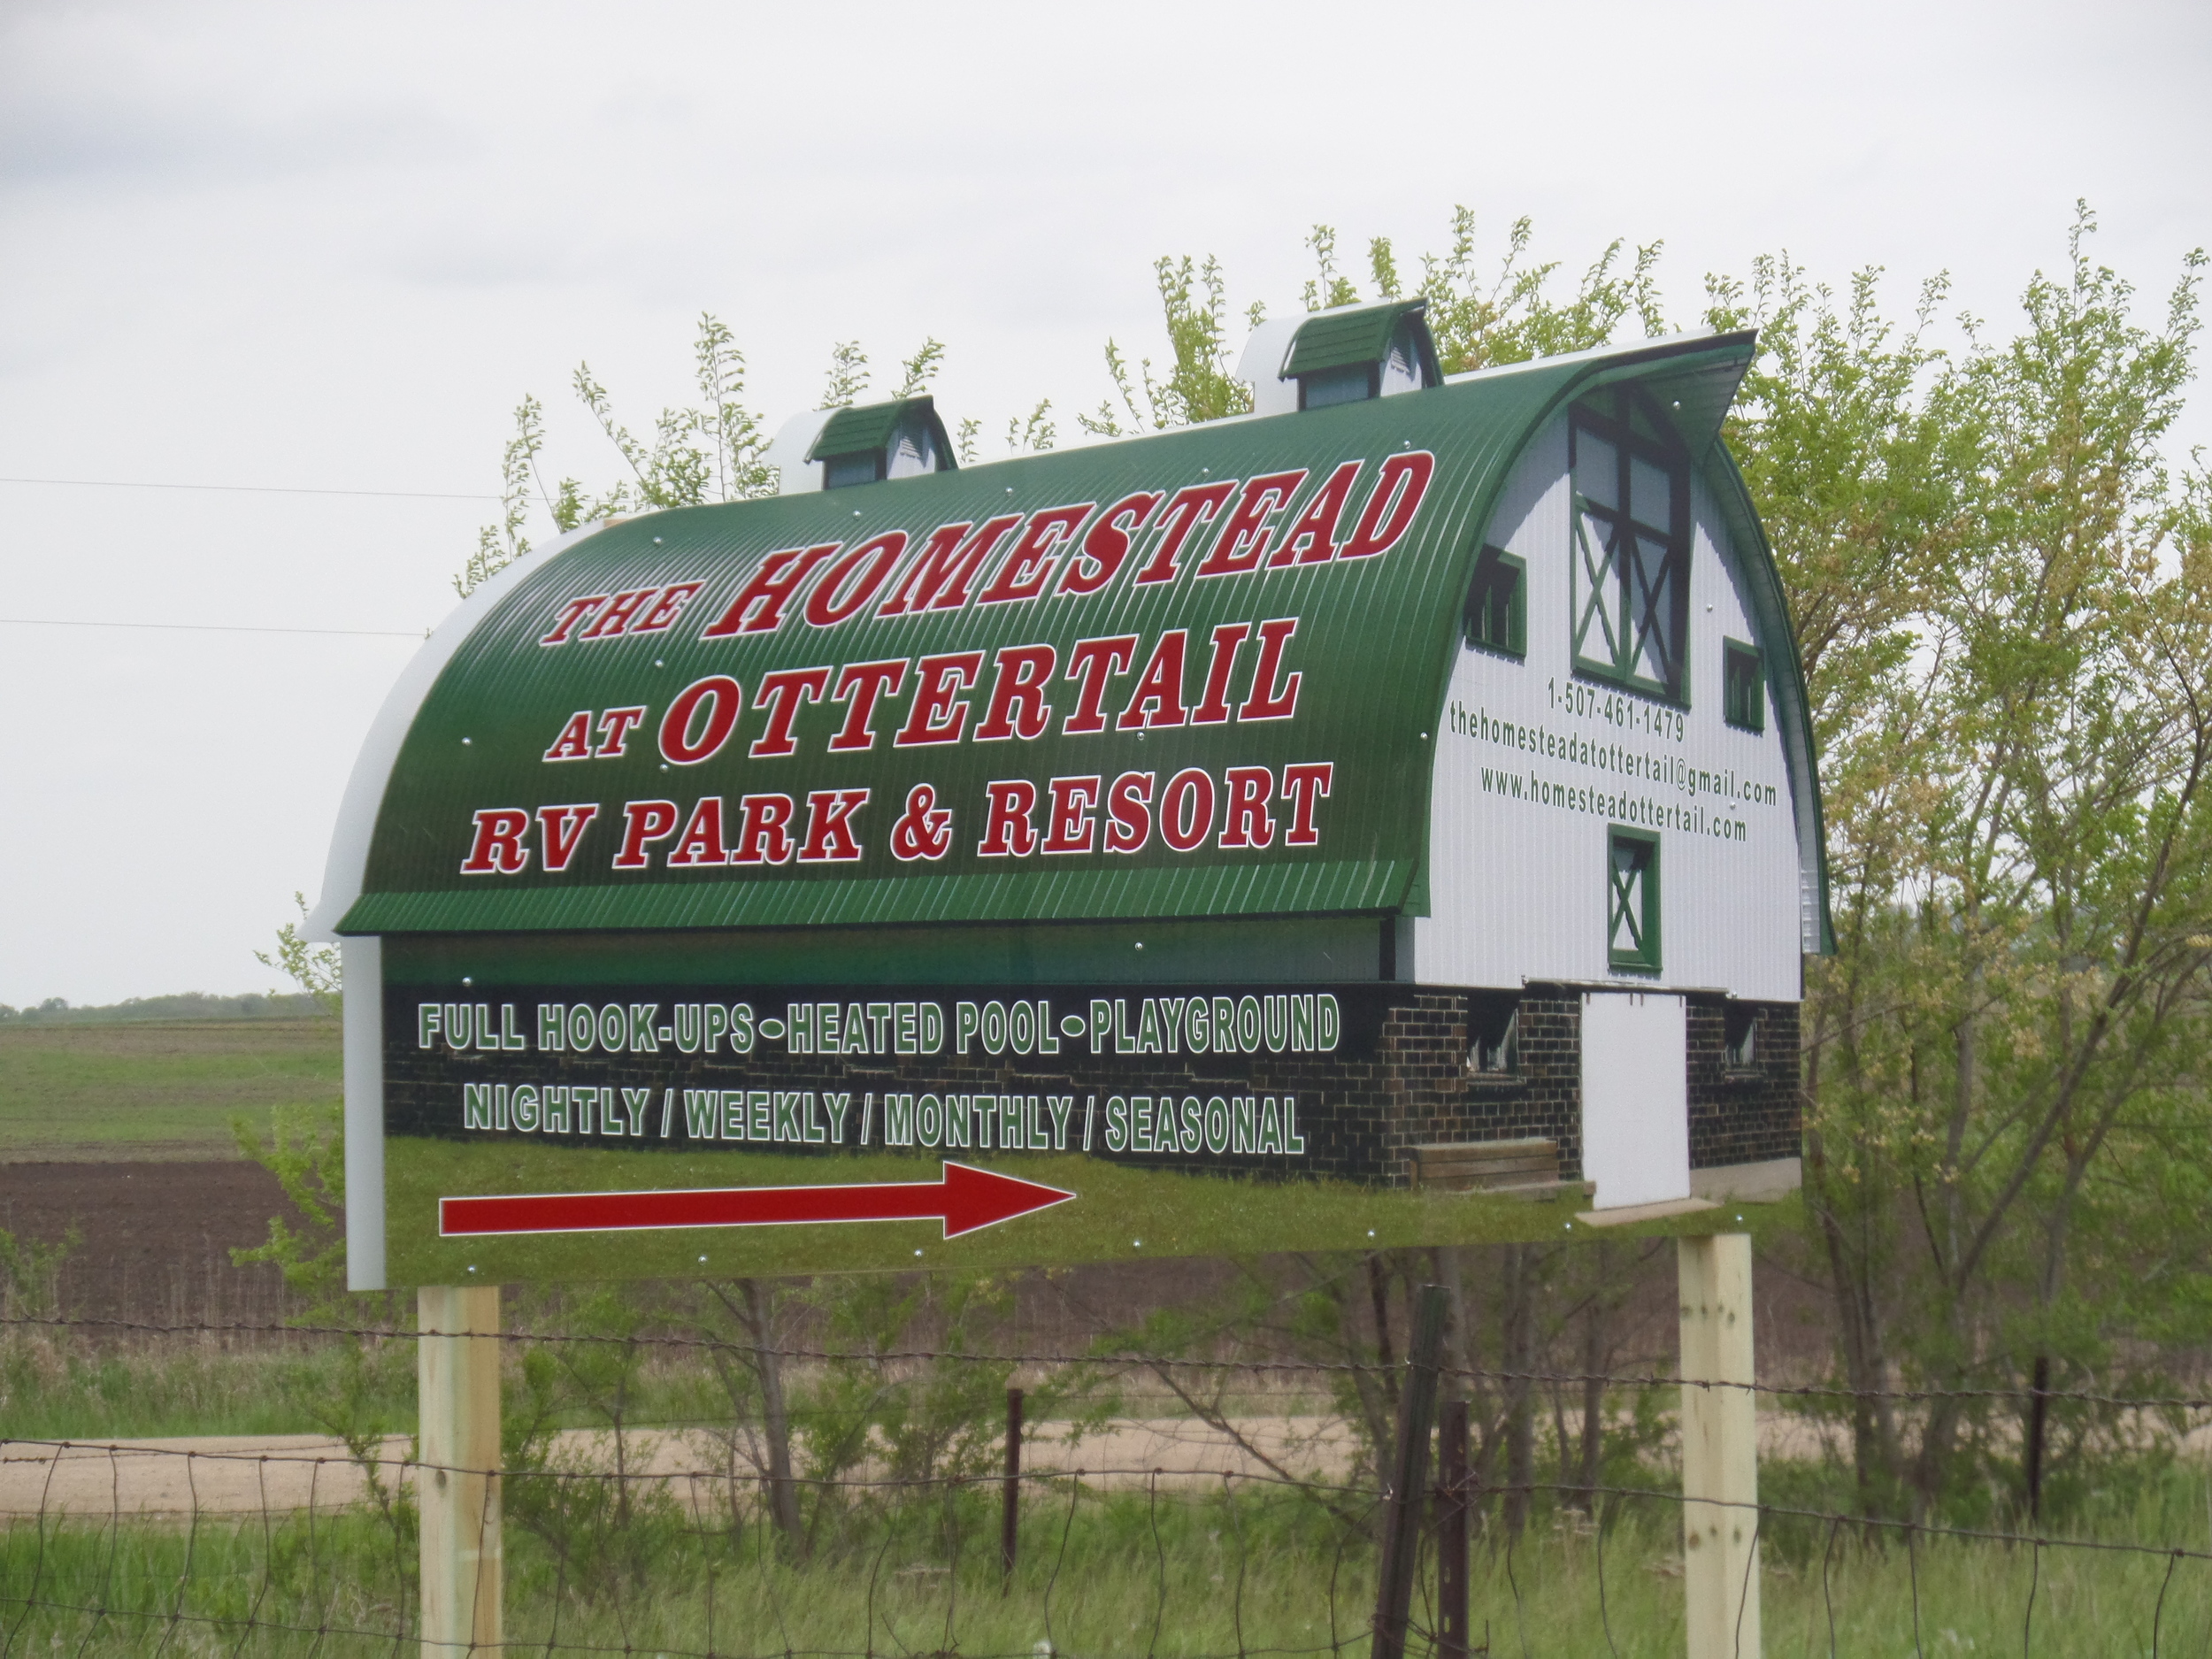  Homestead at Ottertail RV Park and Resort sign&nbsp; 